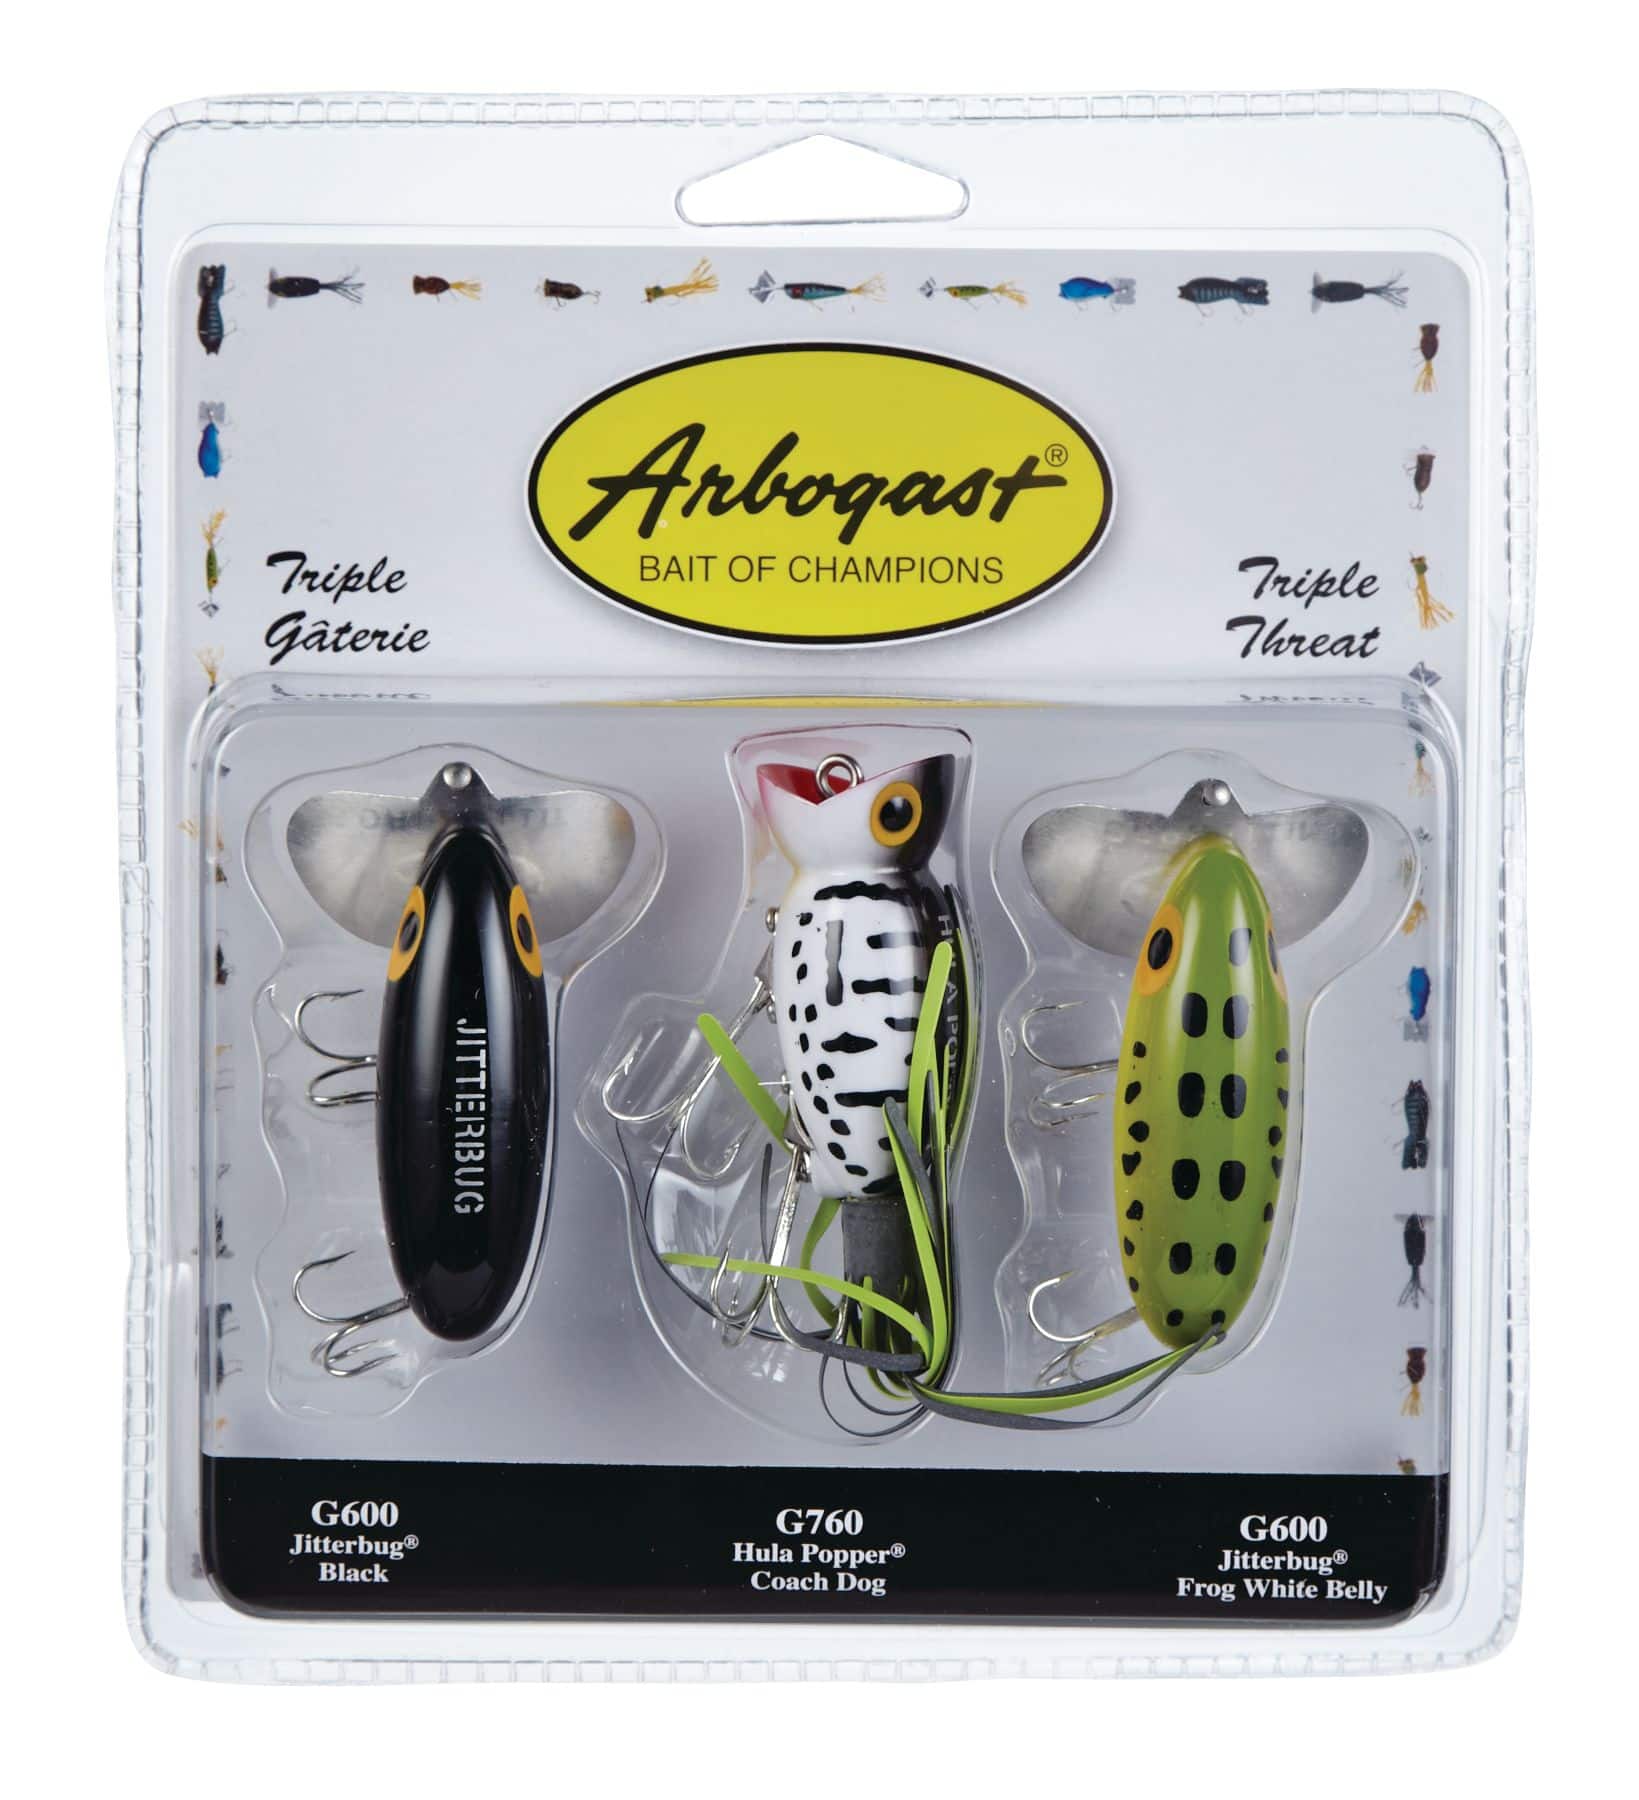 Buy SPE FISHING FROG COMBO OF 3 PC DUAL COLOR SHADED Online In